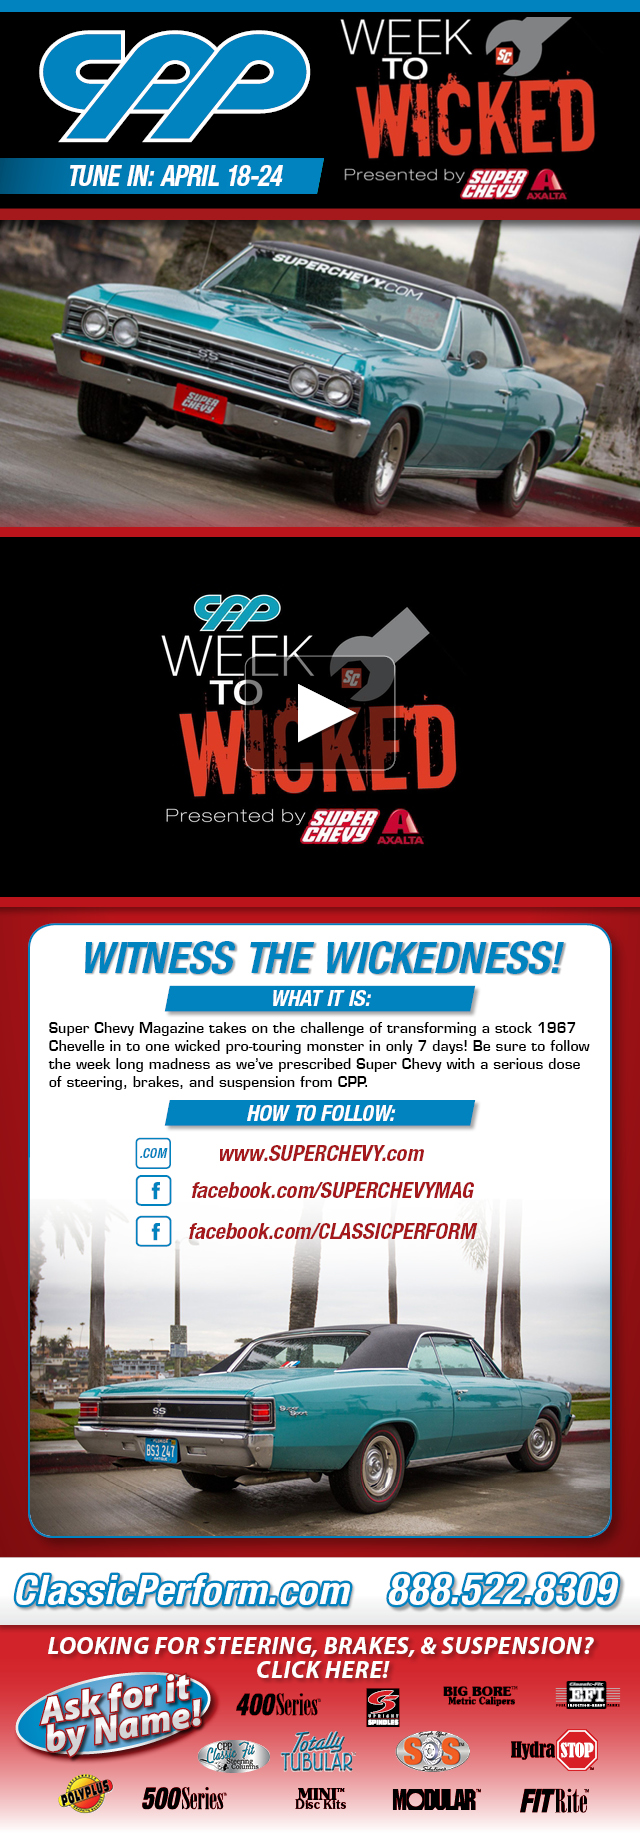 Cpp Week to Wicked